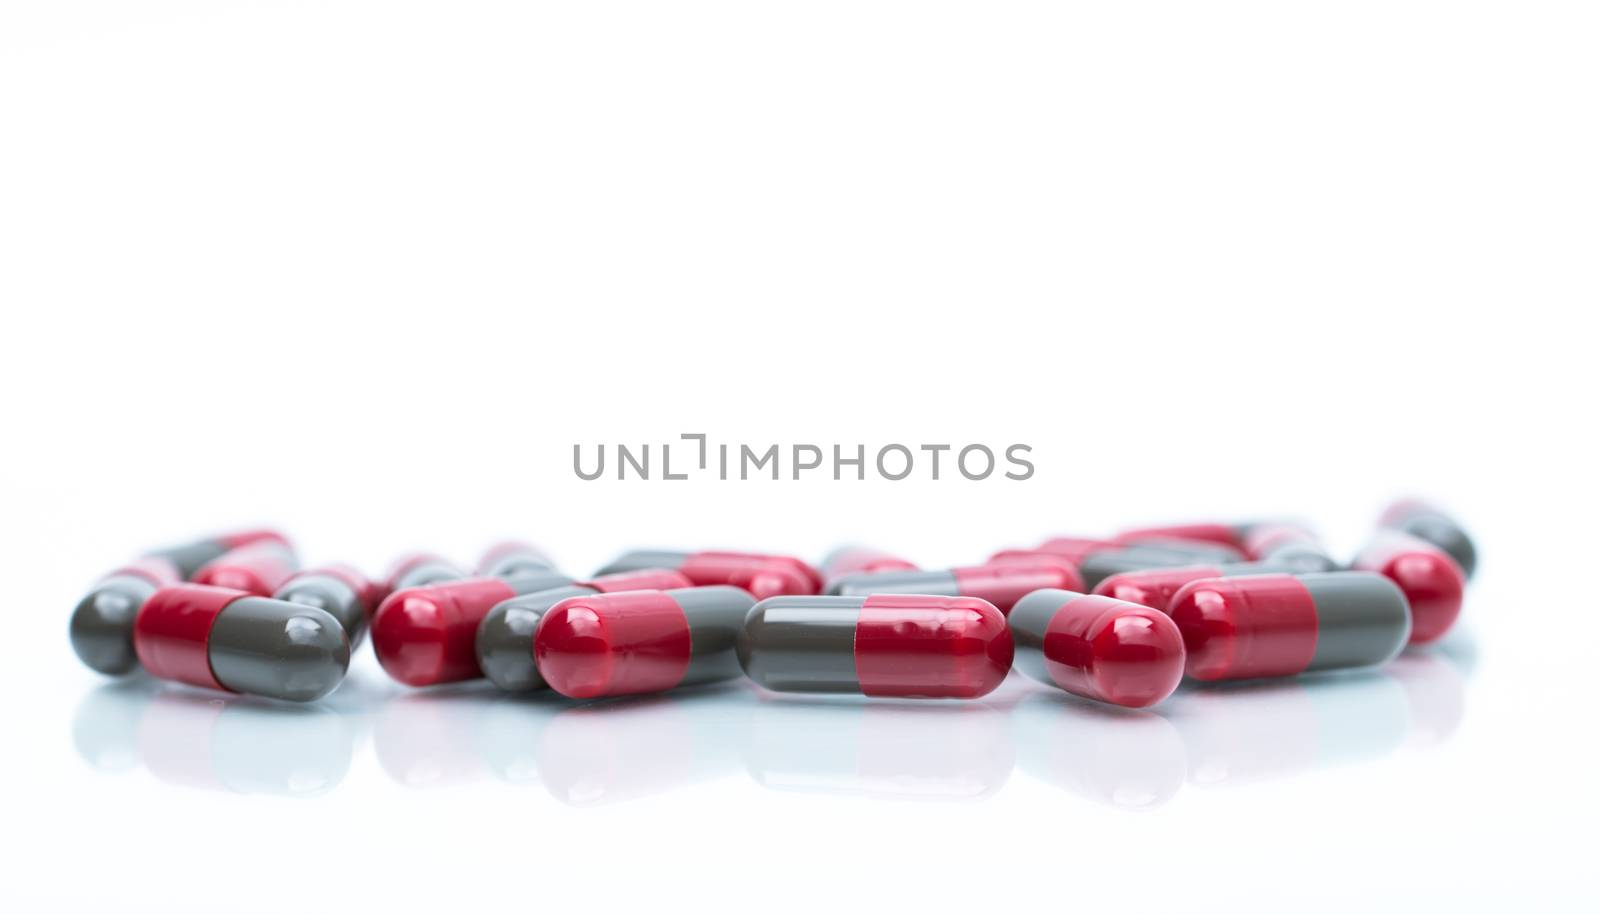 Macro shot detail selective focus of red and grey capsule pills isolated on white background with copy space for text. Migraine prophylaxis treatment concept. Pharmaceutical industry. Pharmacy background. Global healthcare concept. by Fahroni